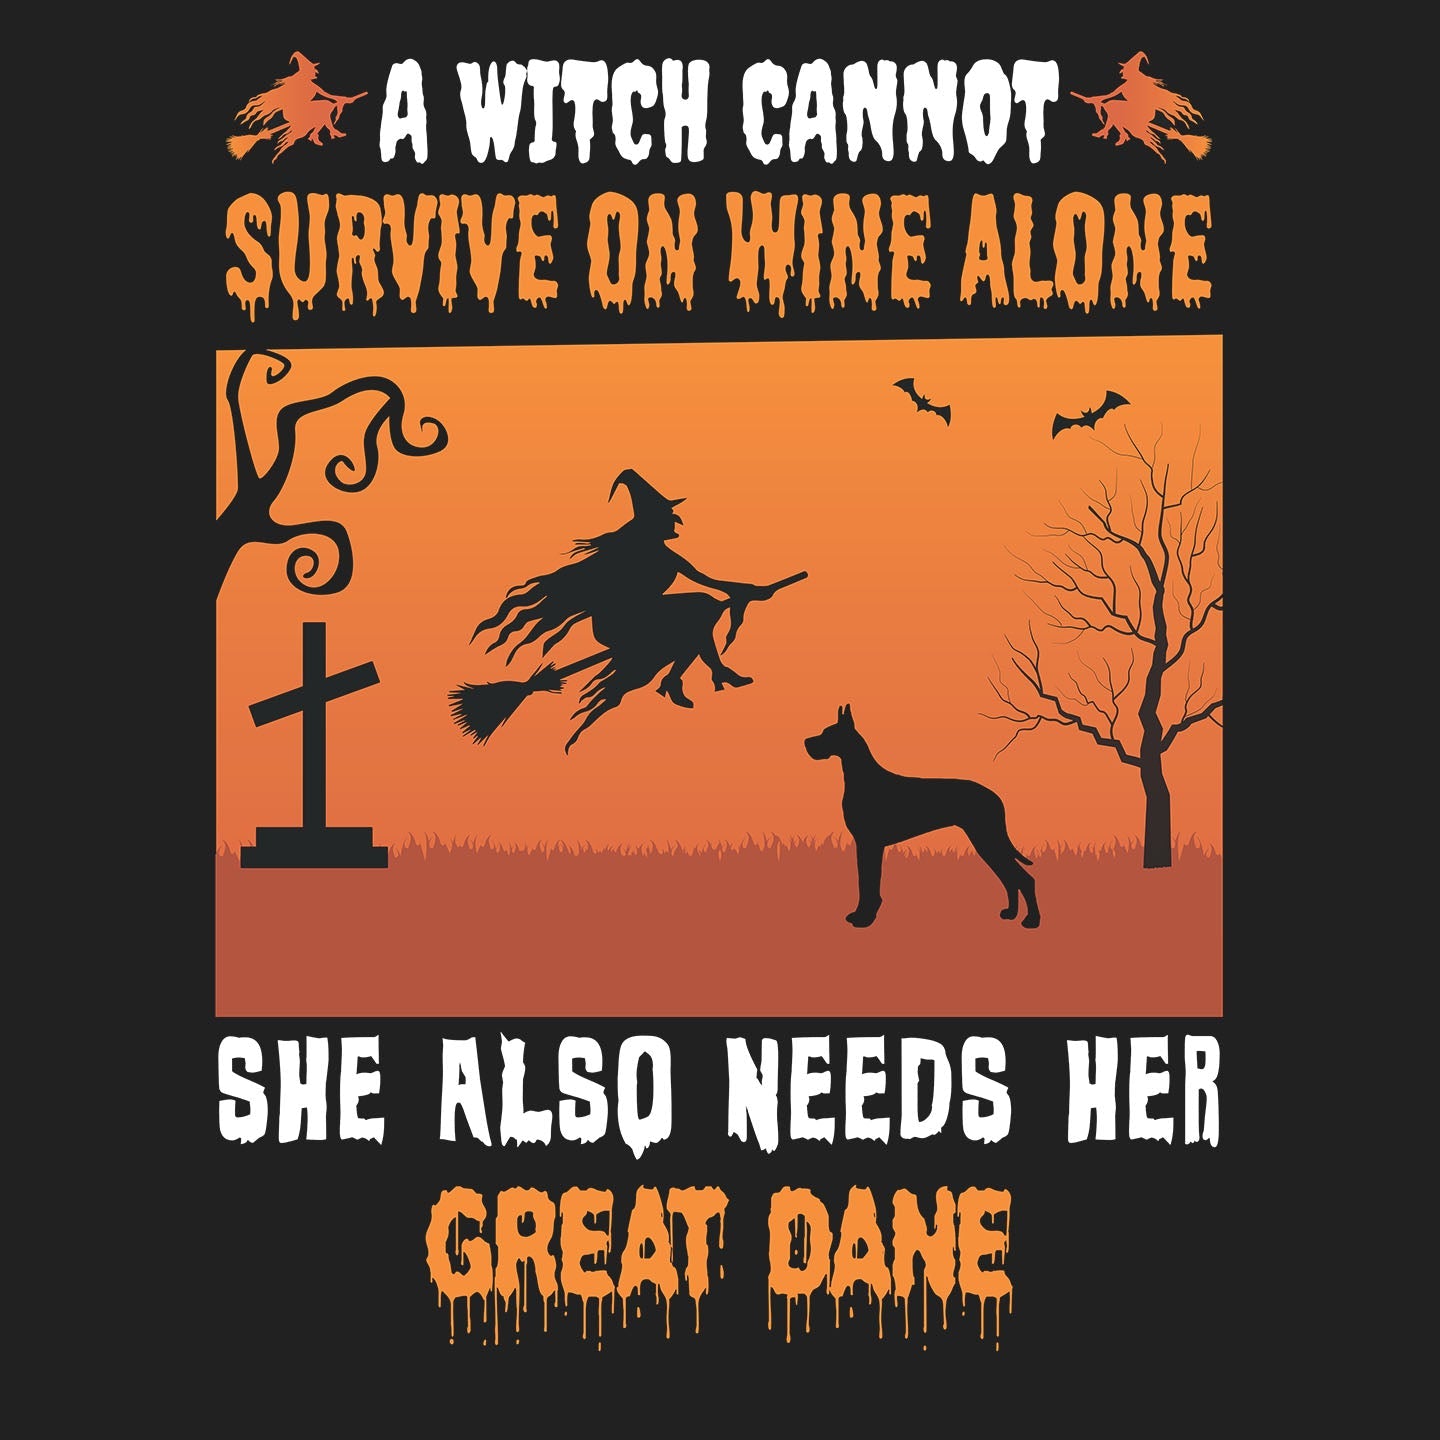 A Witch Needs Her Great Dane - Women's V-Neck T-Shirt